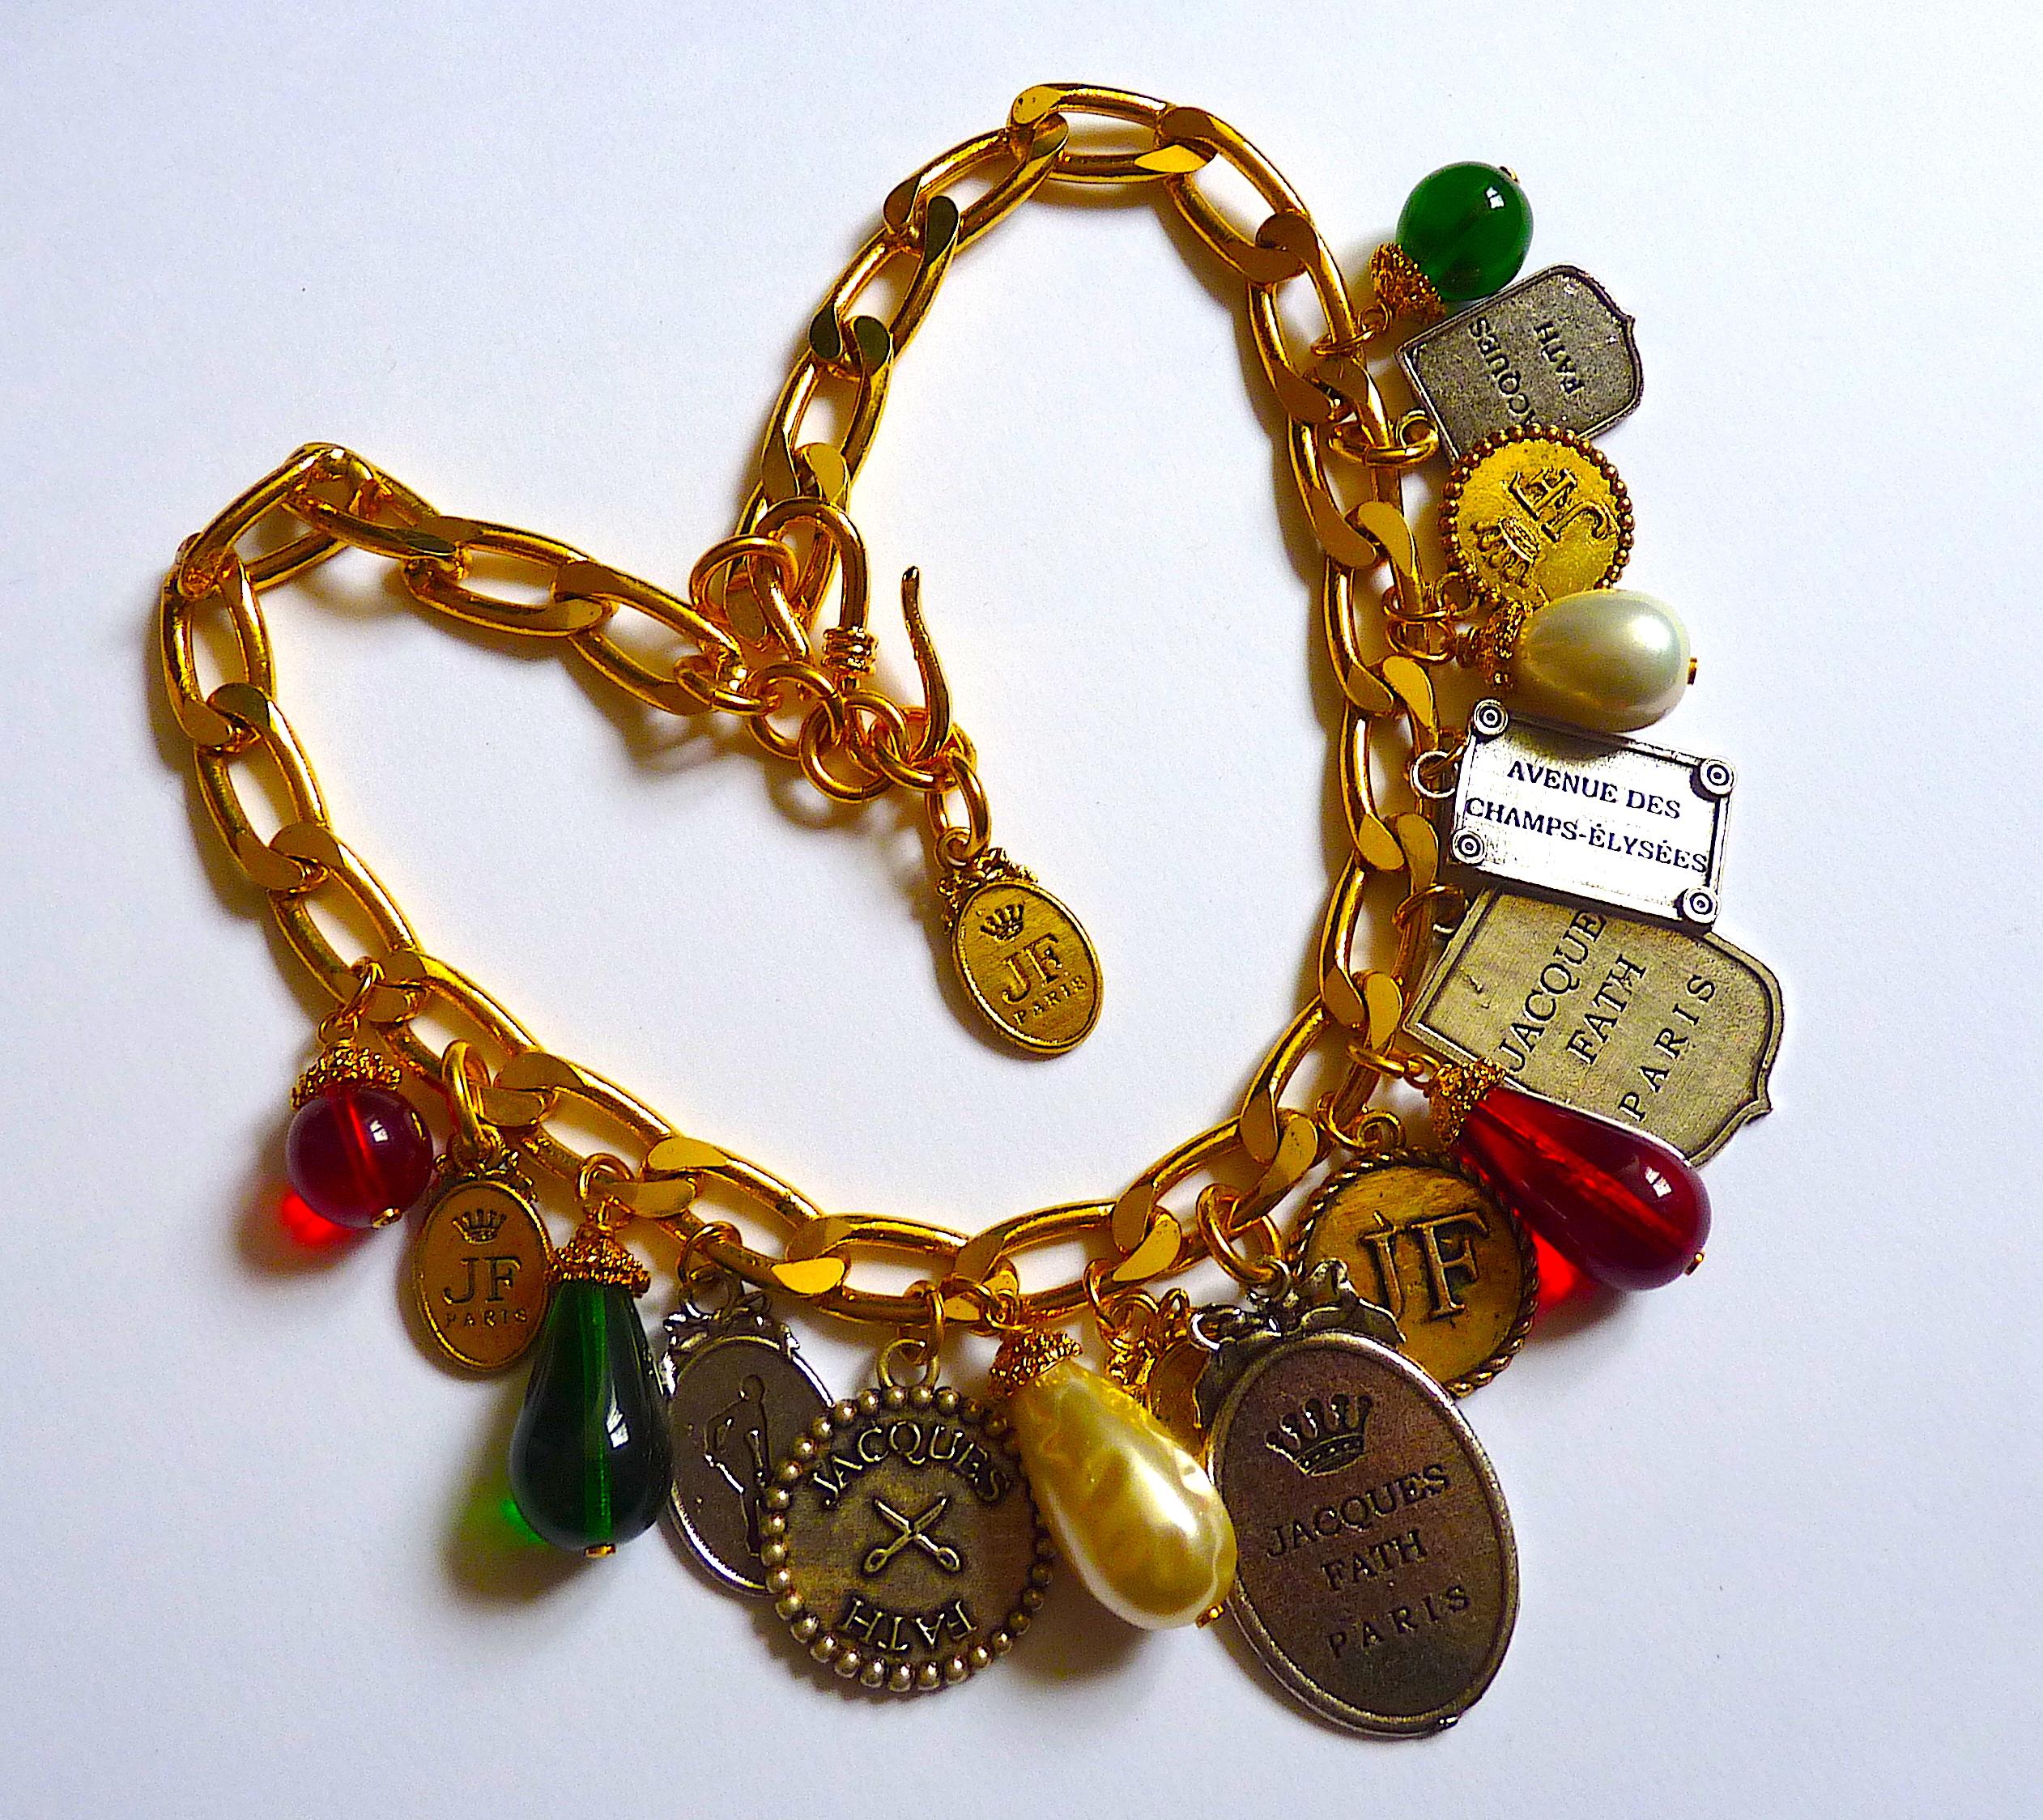 Jacques Fath Paris poured glass and charms choker Necklace, gold tone Metal and Red, Green, Poured Glass Drops, Ultra Rare Masterpiece and Highly Collectable ! Rare Vintage from the 1980s

Stamped Jacque Fath Paris on the charms and metal tag with